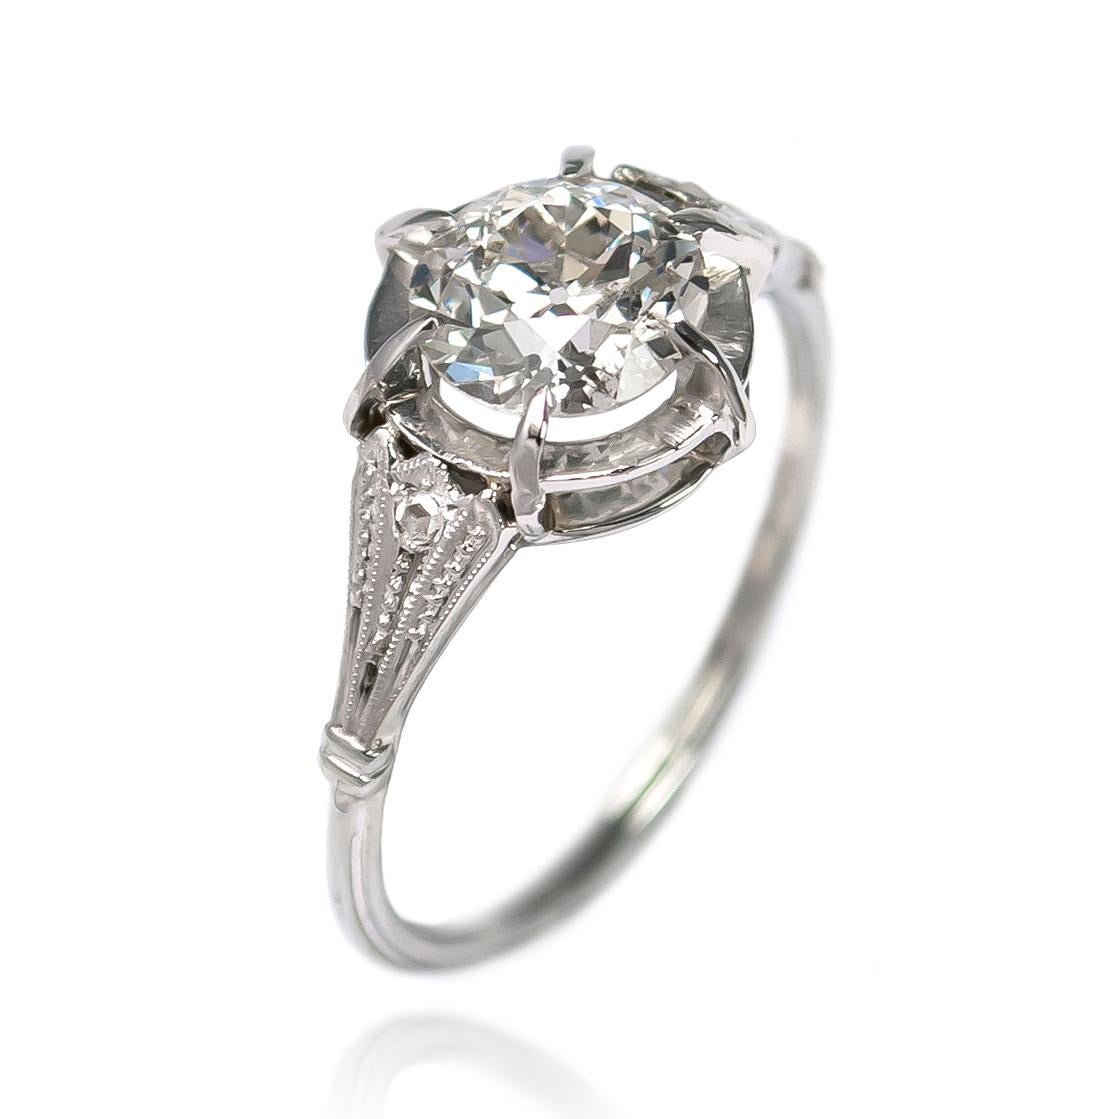 This sweet ring is a special piece from the J. Birnbach vault! This unique antique engagement ring features a 1.19 carat Old Euro round diamond, I color and I1 clarity. The handmade platinum setting is full of intricate detail, perfect for someone